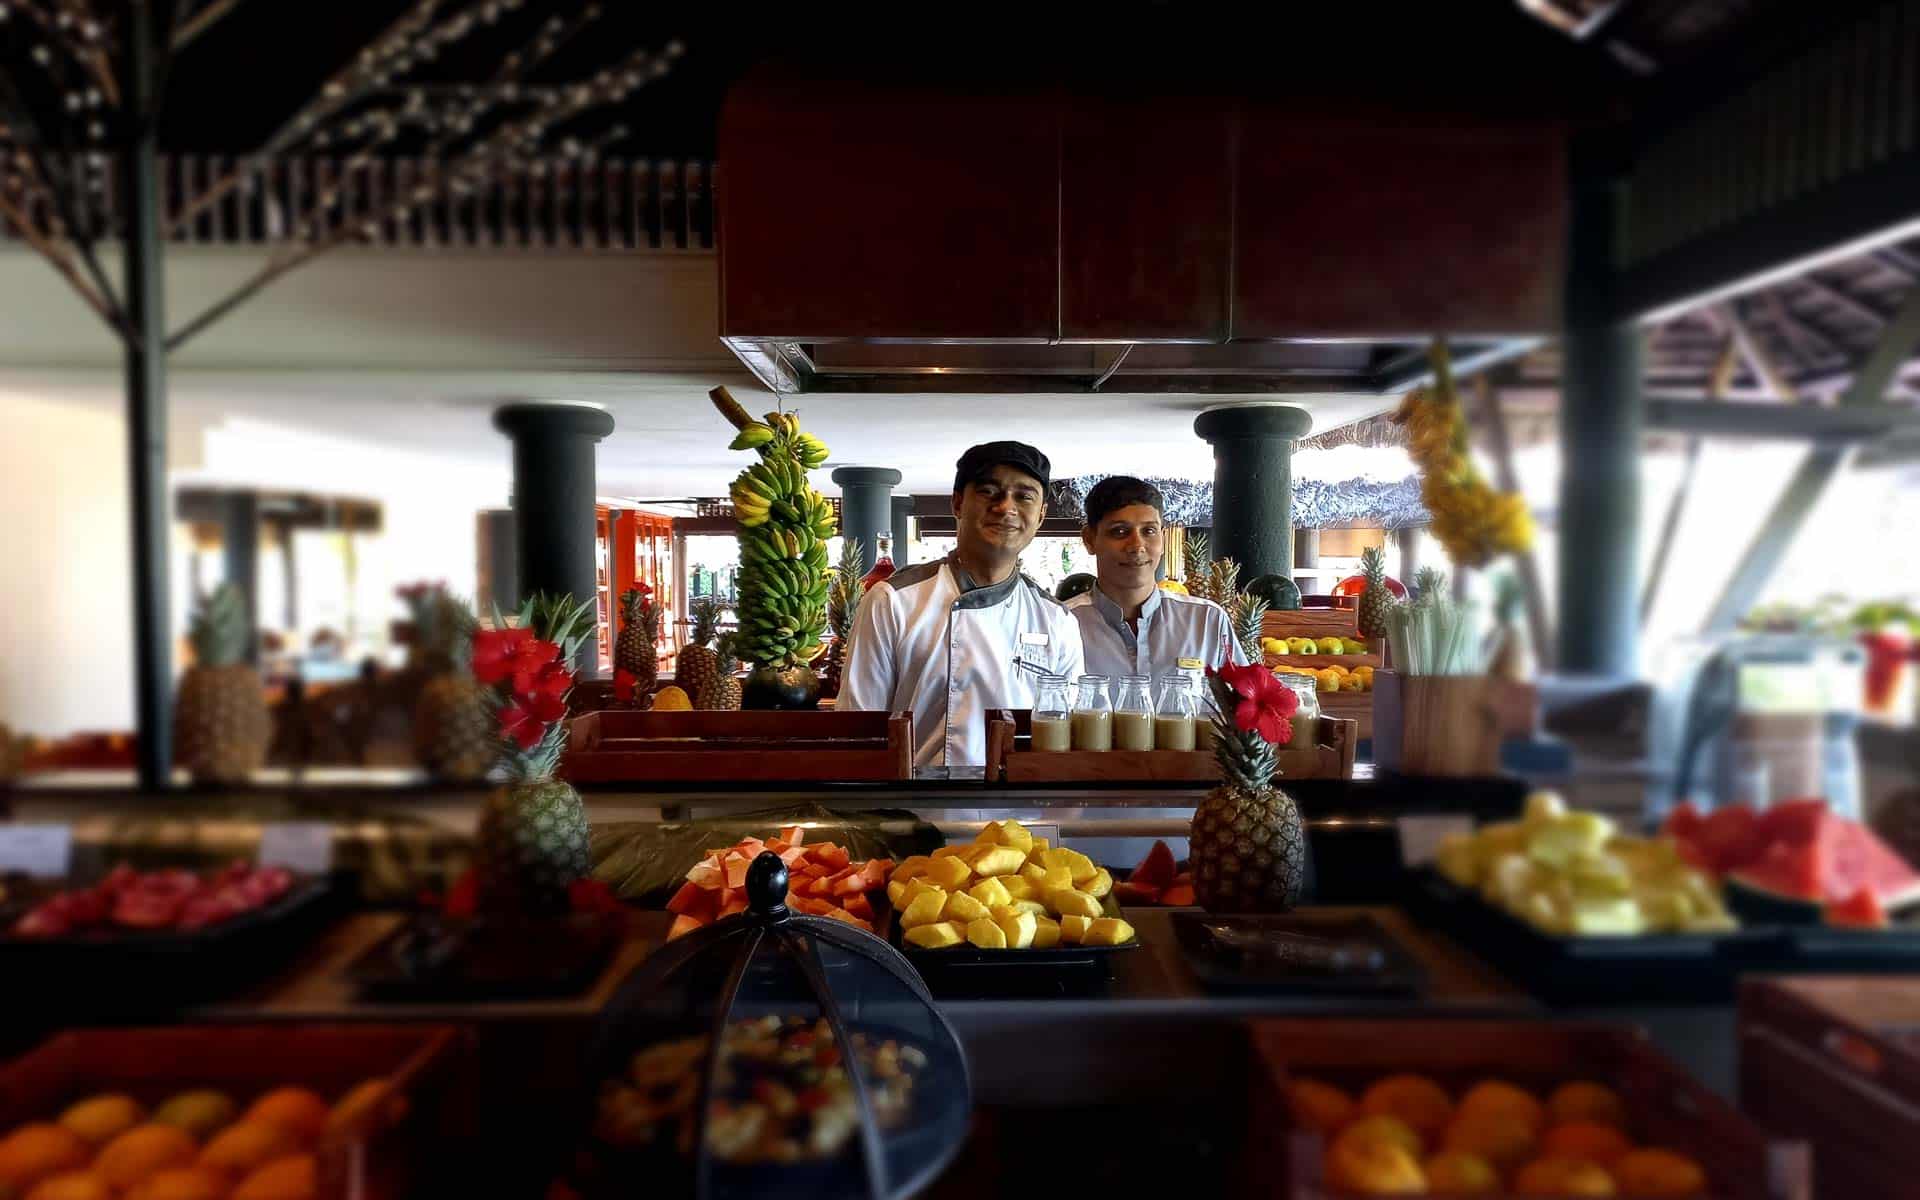 Two staff standing at the breakfast counter with lots of fruit in the foreground